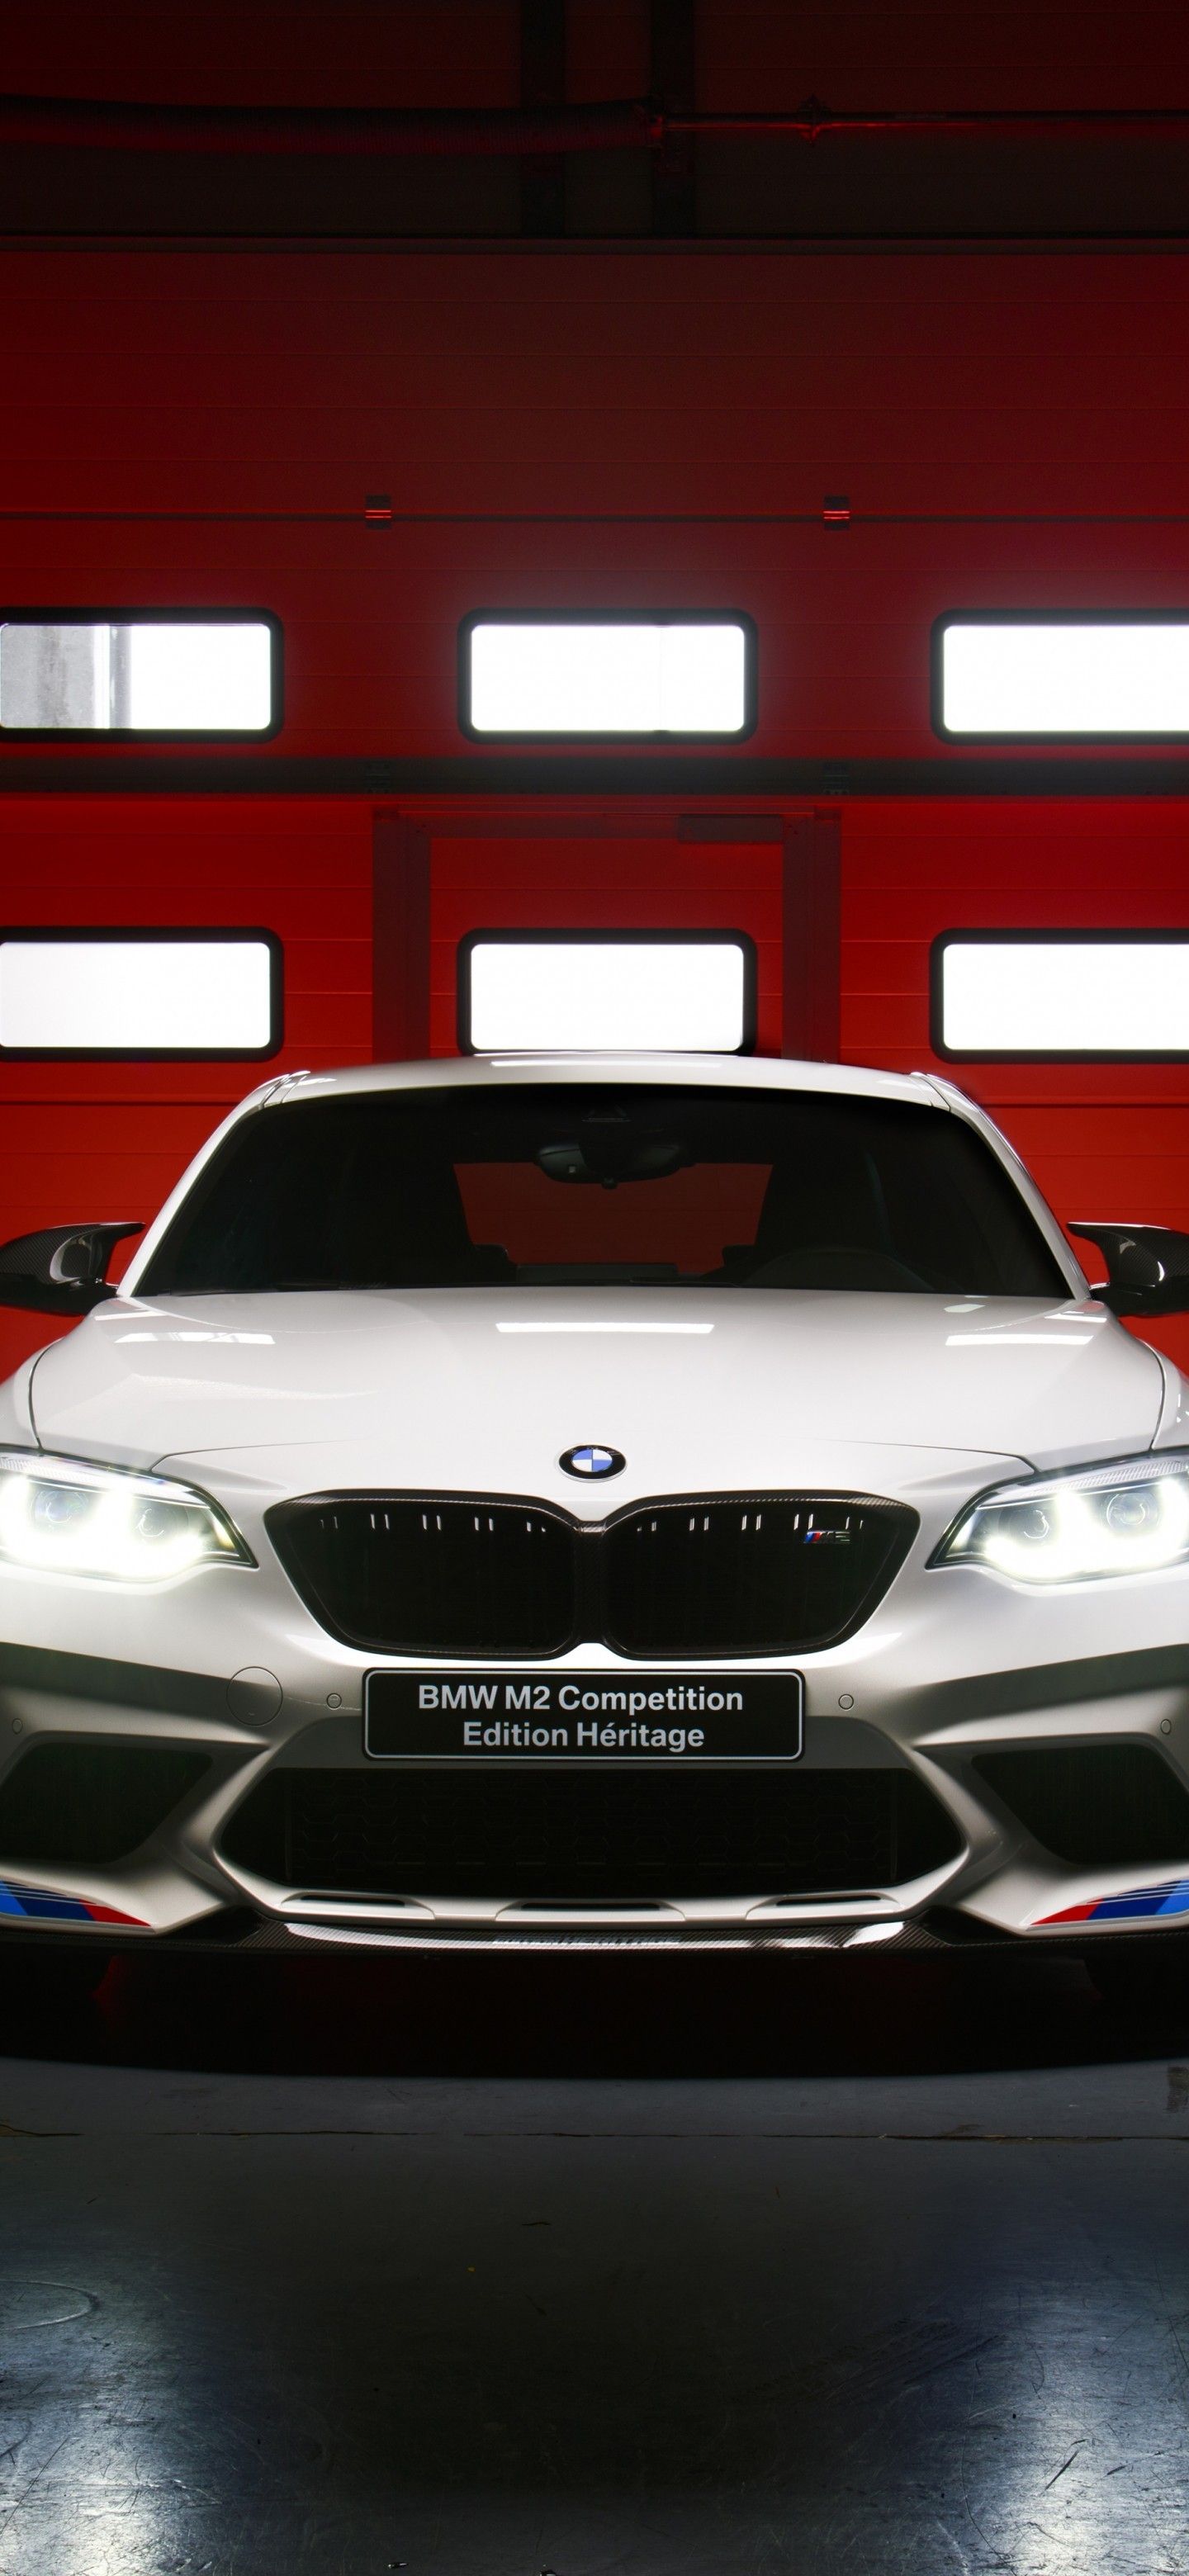 Download 1440x3120 Bmw M2 Competition, Headlights, Luxury Cars